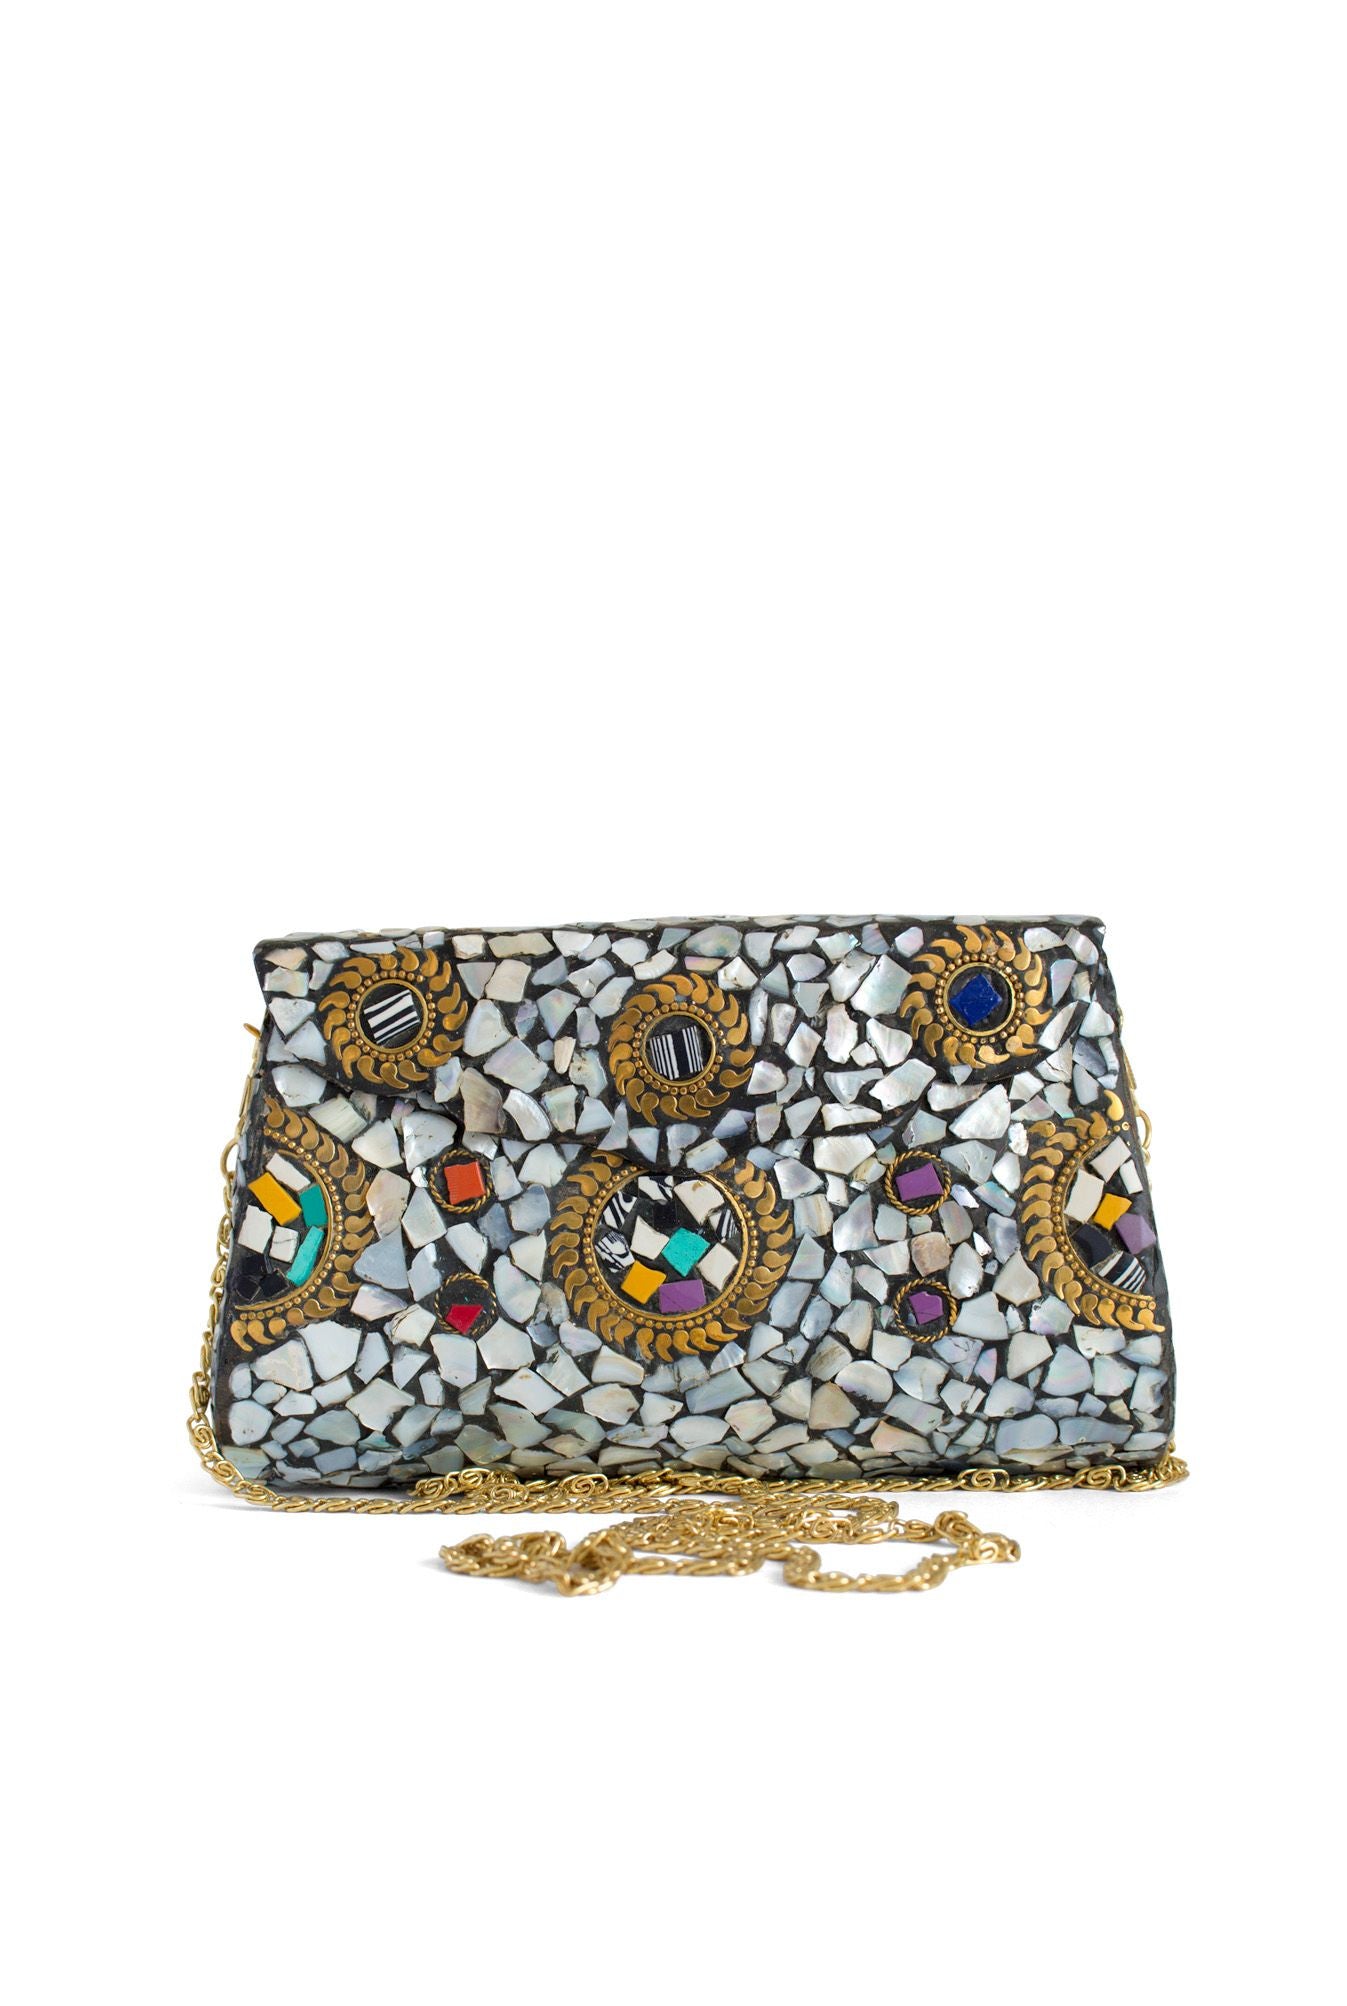 Multi-colored Stone Purse with Metal Inlay